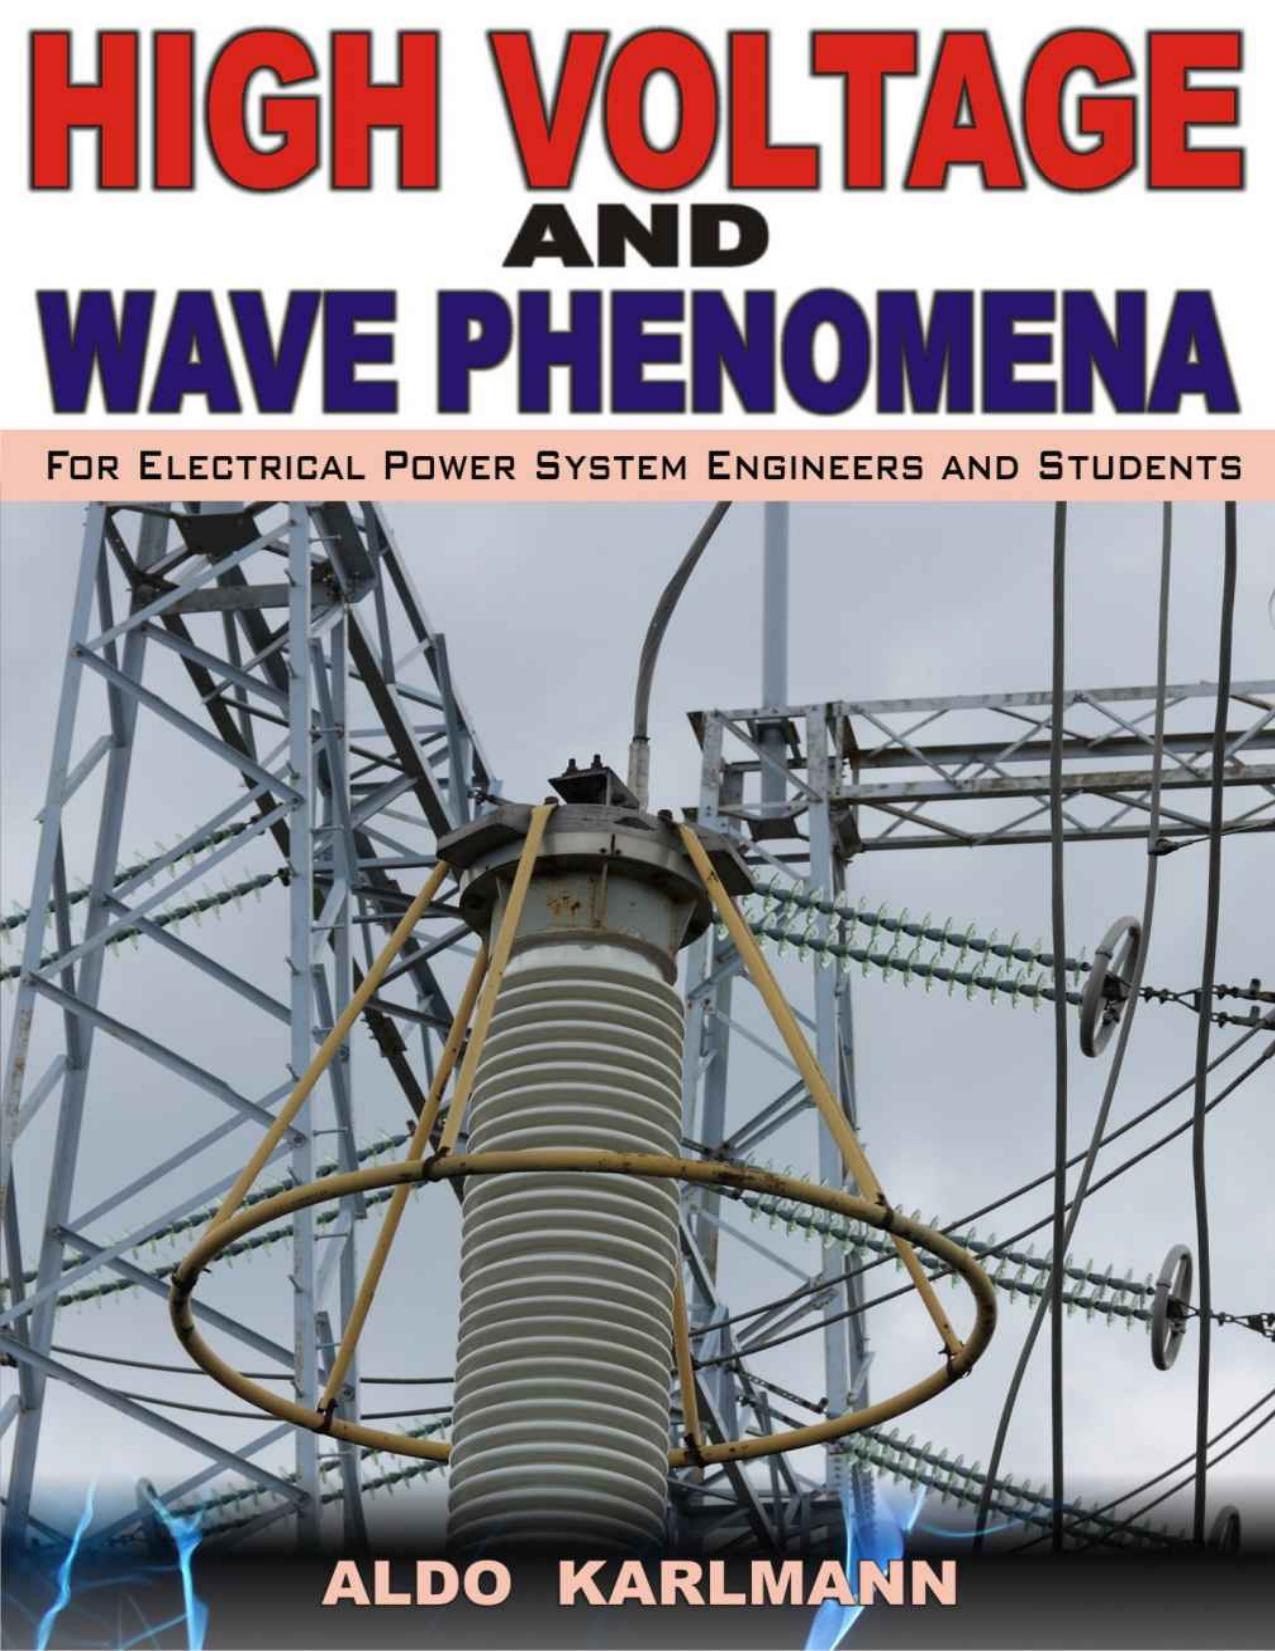 High Voltage and Wave Phenomena: - For Electrical Power System Engineers and Students by Aldo Karlmann